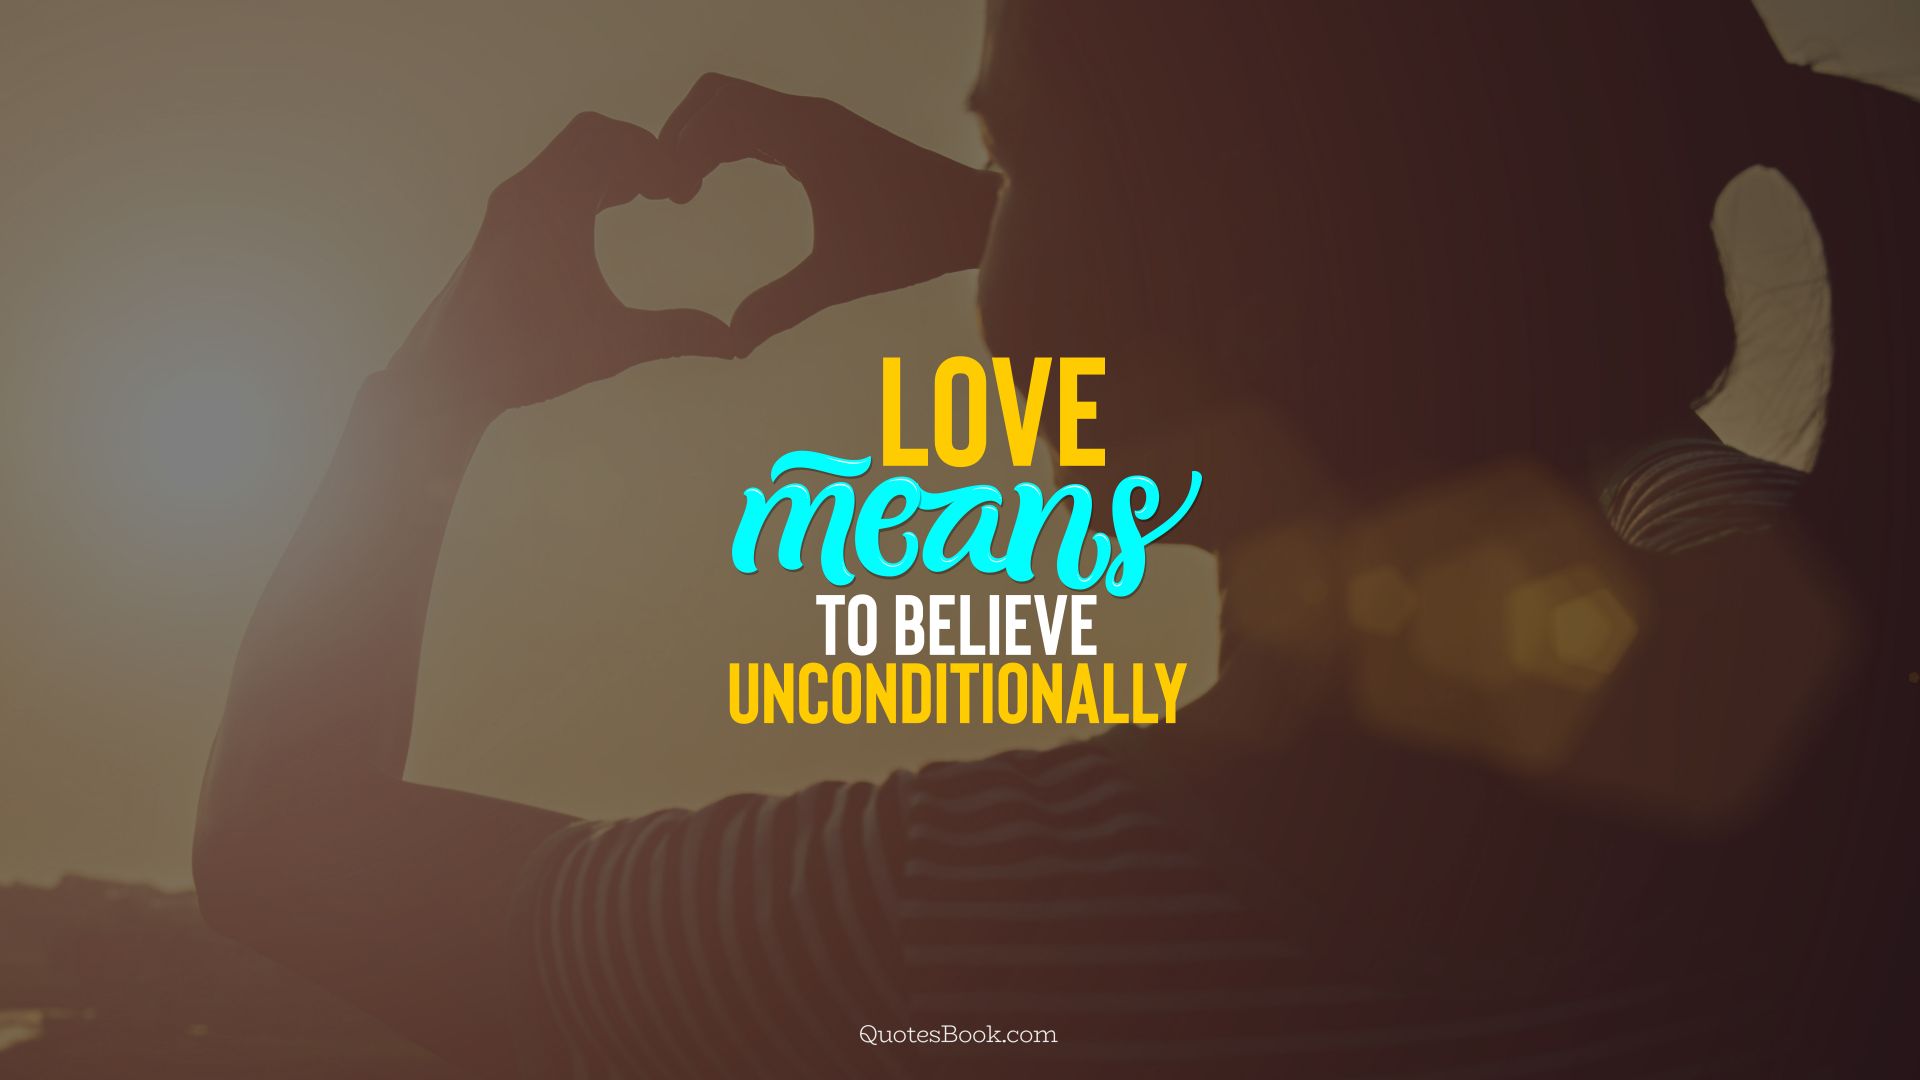 Love means to believe unconditionally. - Quote by QuotesBook